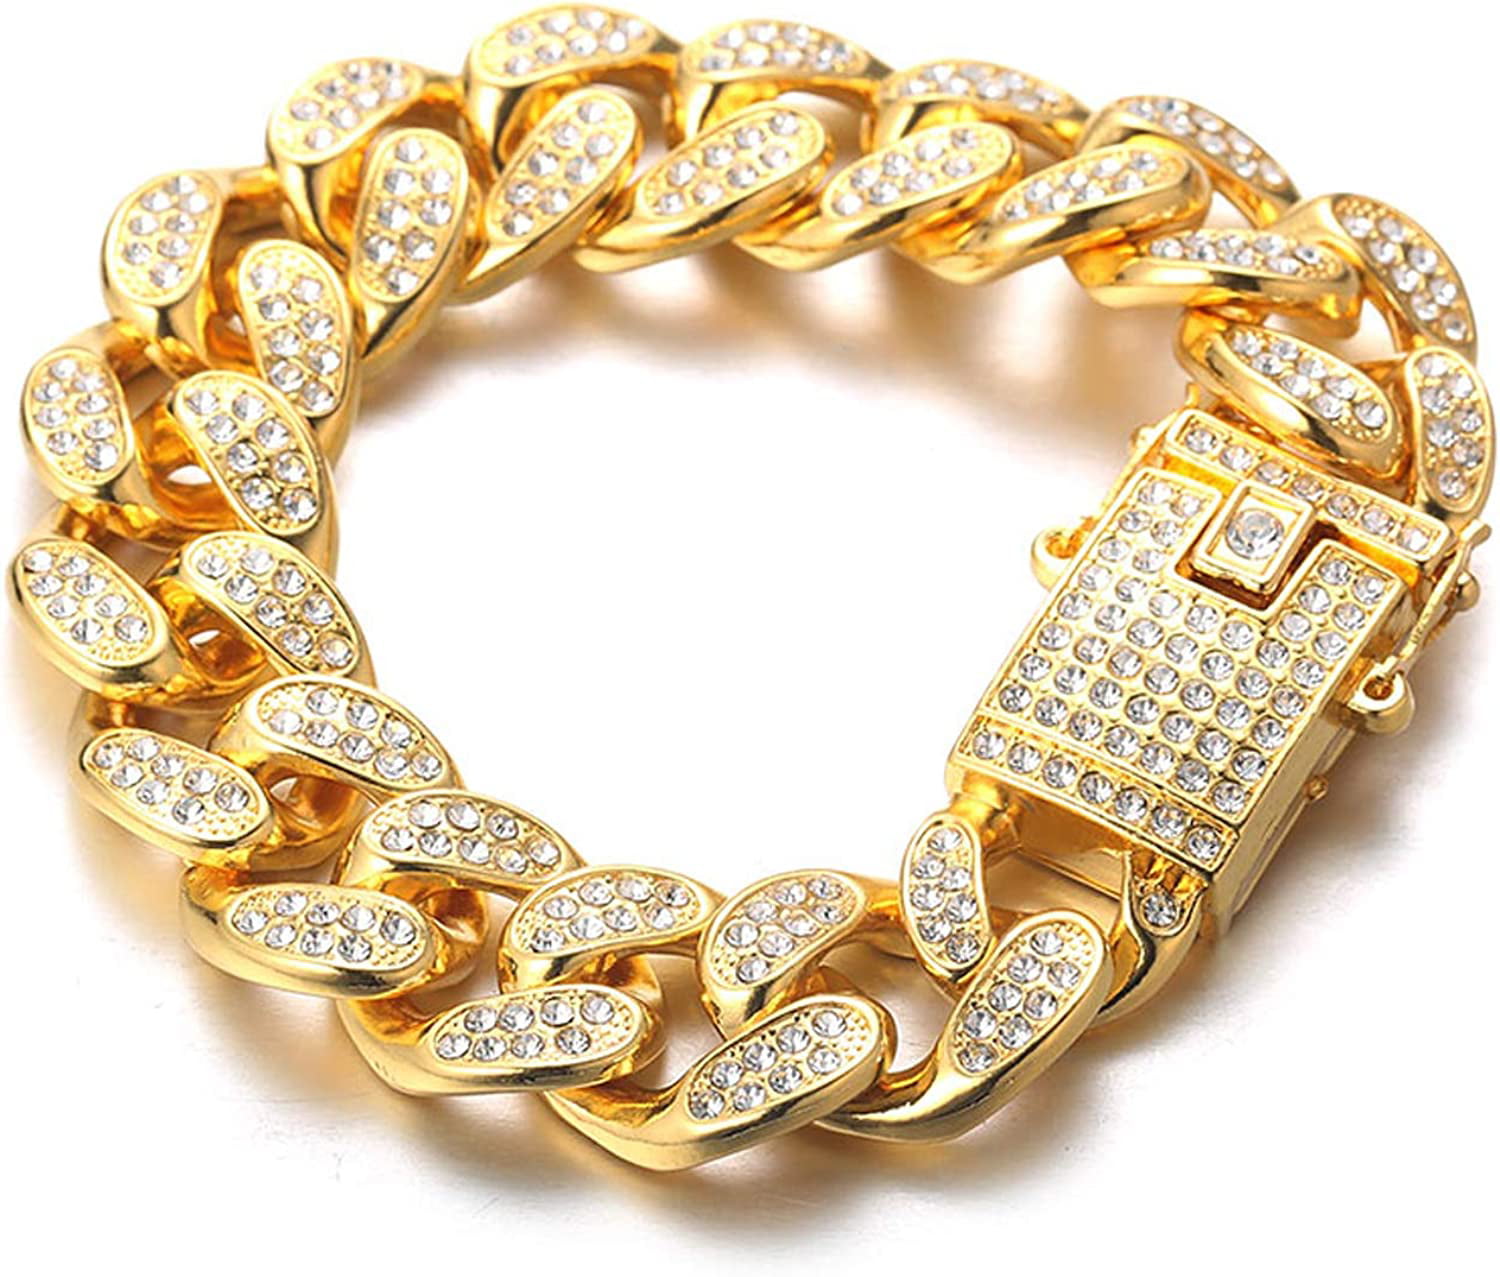 14mm Iced Out White Gold Spike Cuban Link Bracelet – No Cap Jewelry